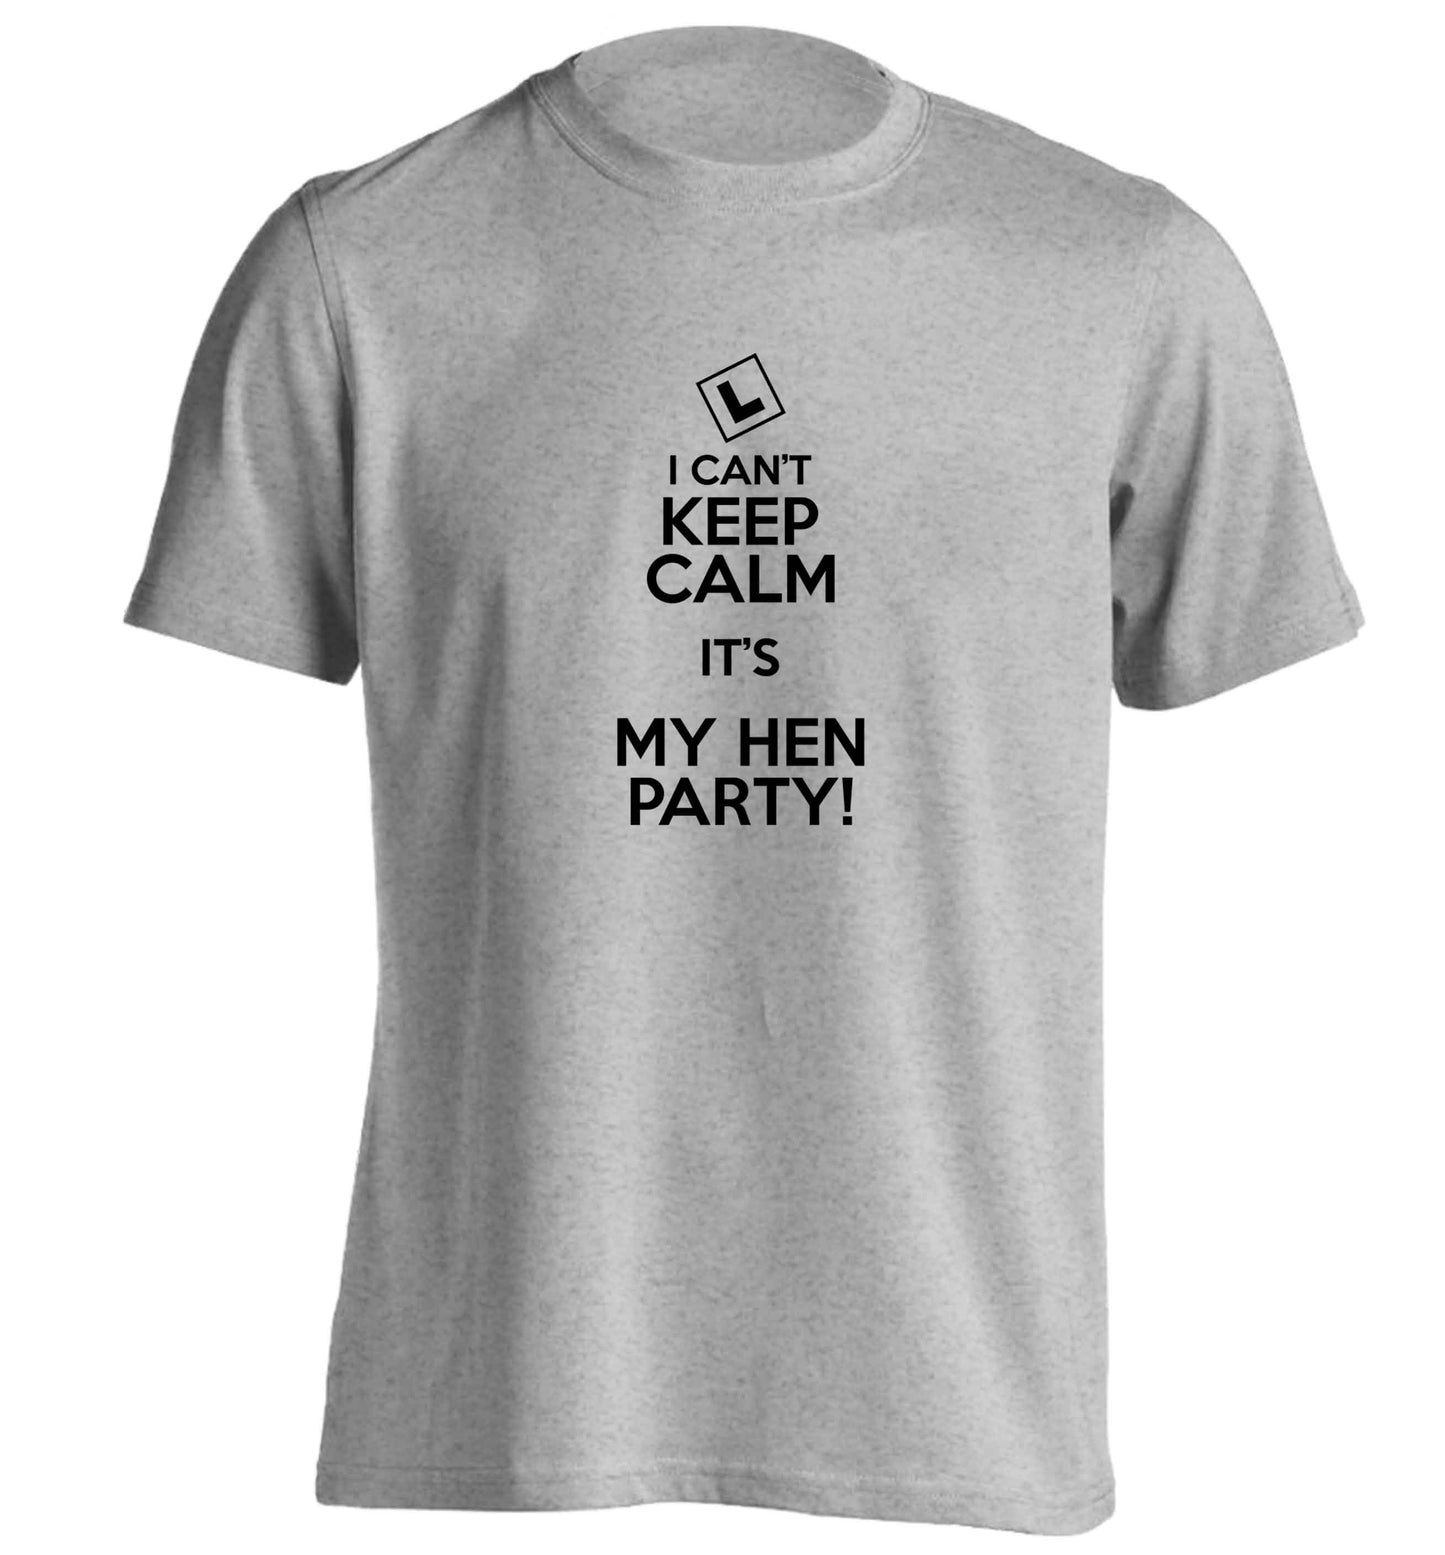 I can't keep calm it's my hen party adults unisex grey Tshirt 2XL